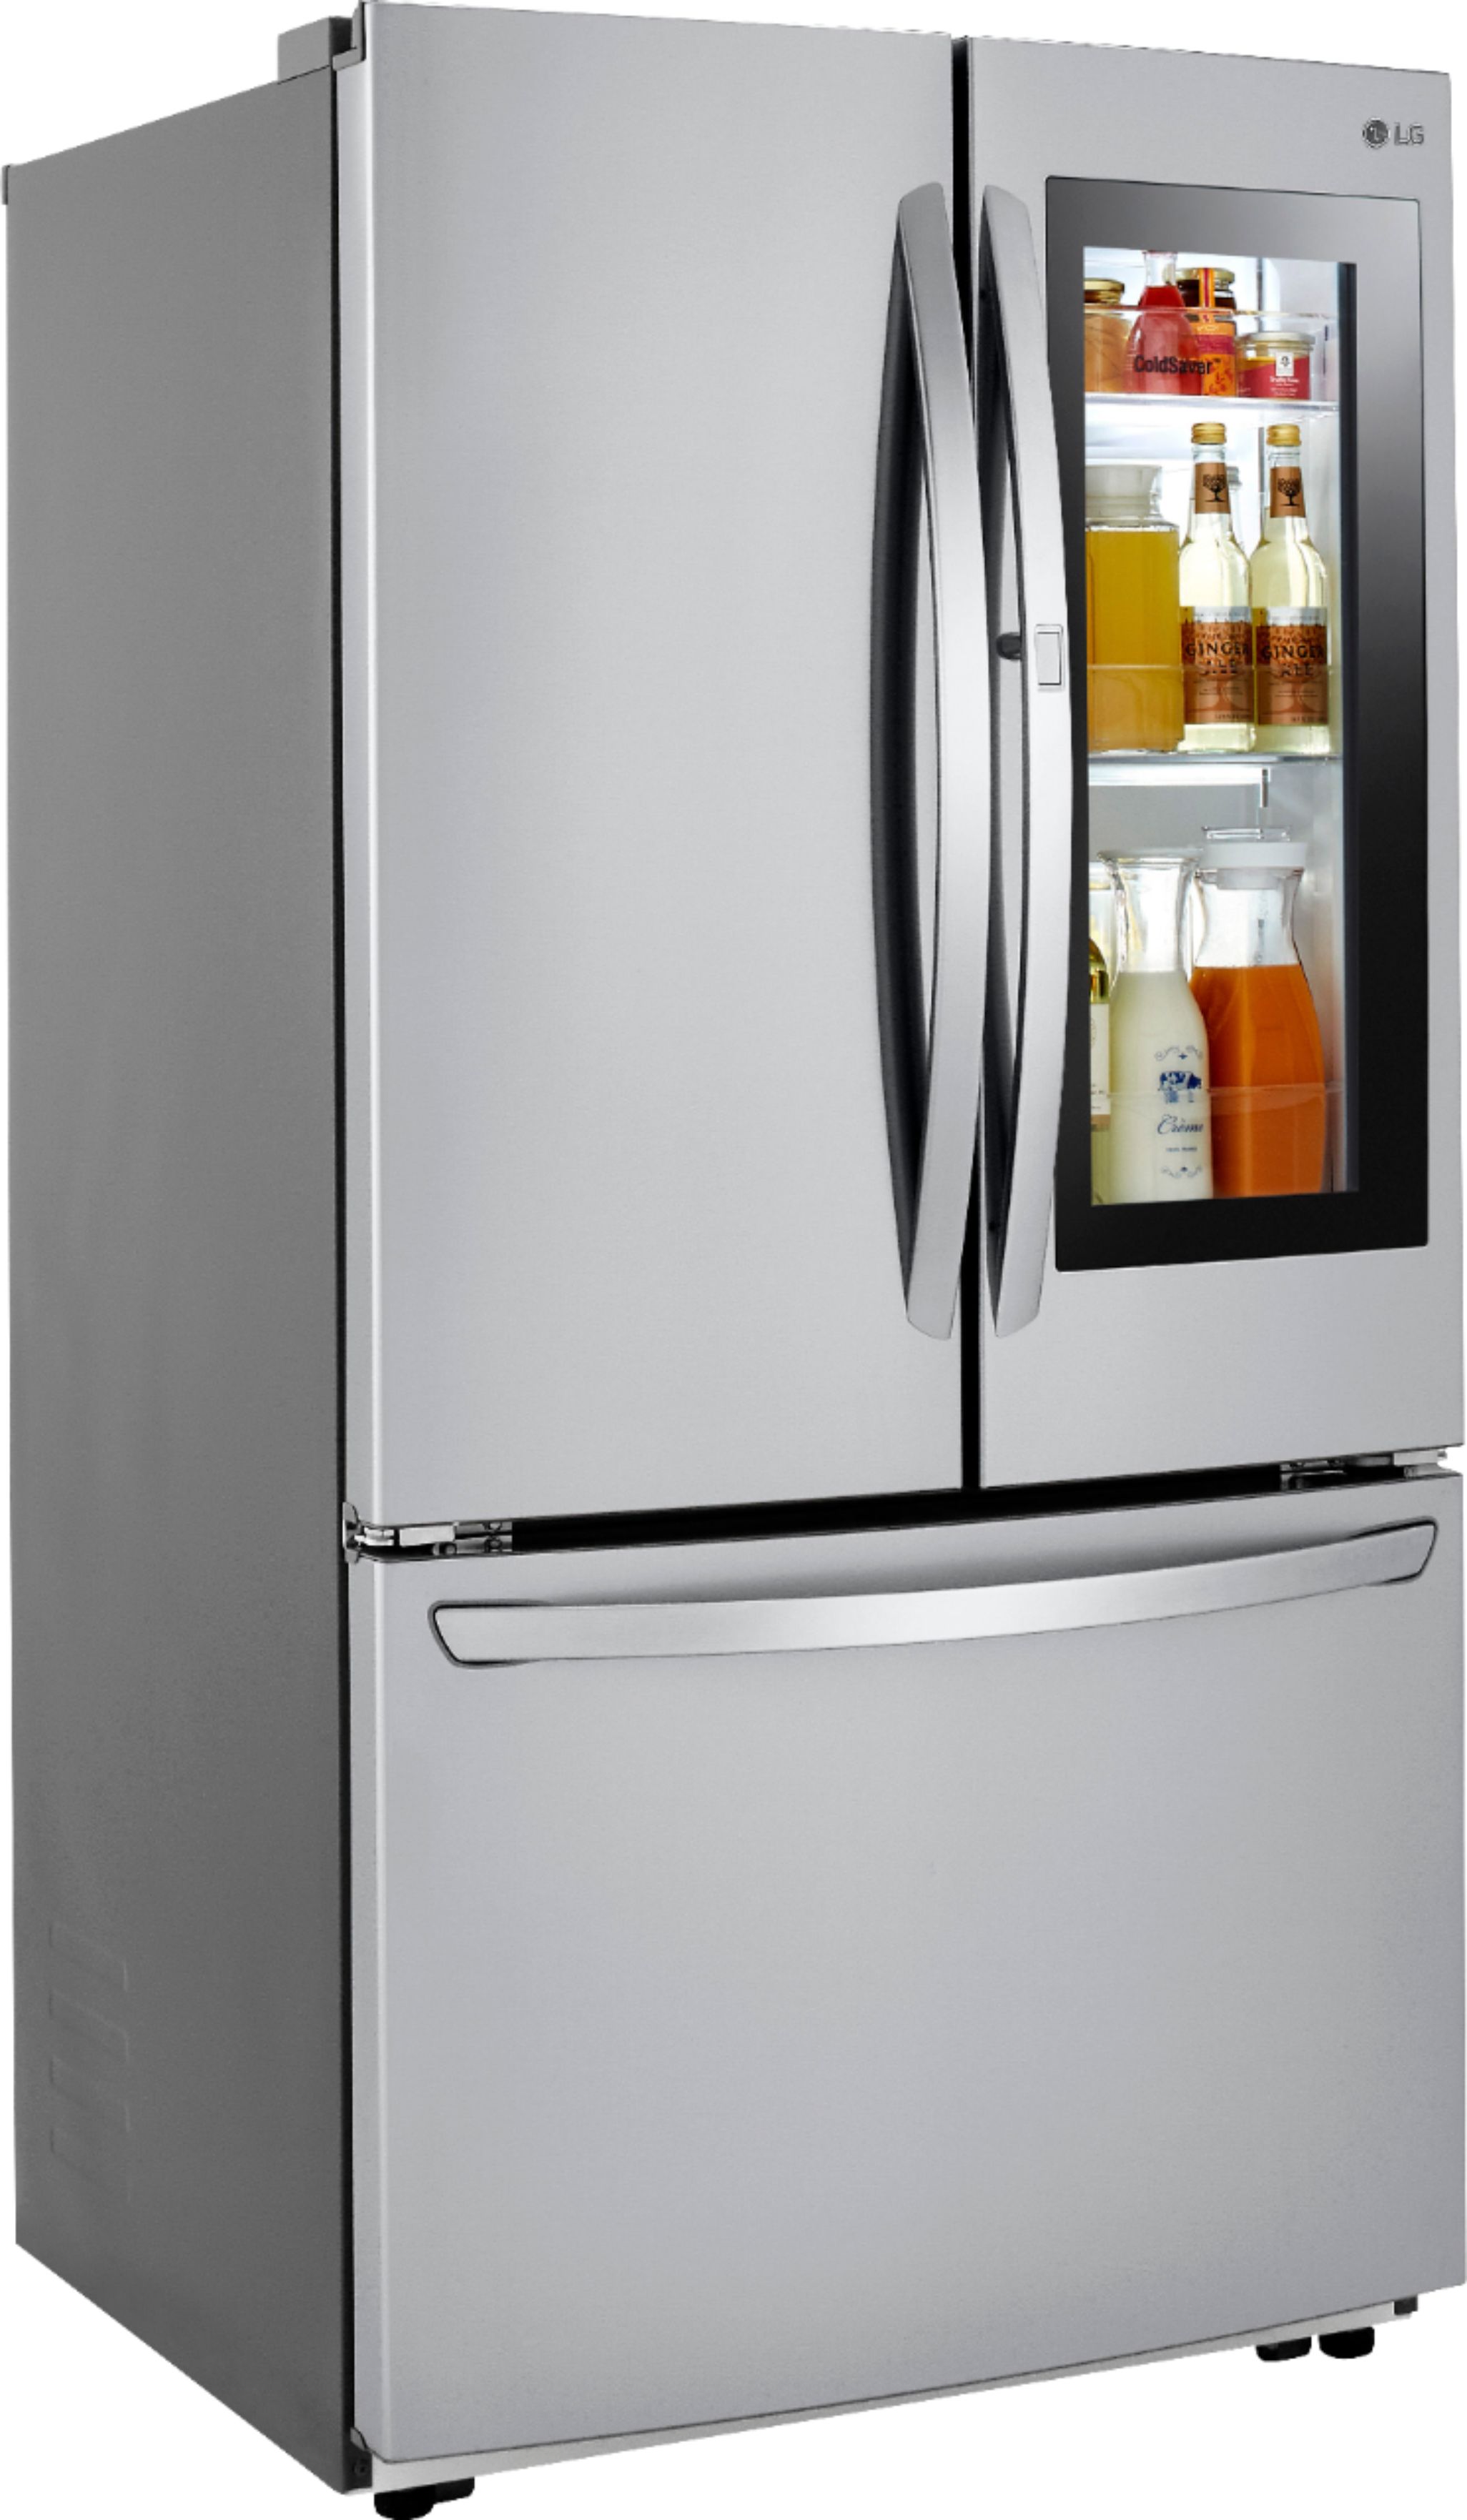 Lg Electronics 23 3 Cu Ft French Door Refrigerator With Instaview Dual And Craft Ice In Printproof Black Stainless Counter Depth Lrfvc2406d The Home Depot